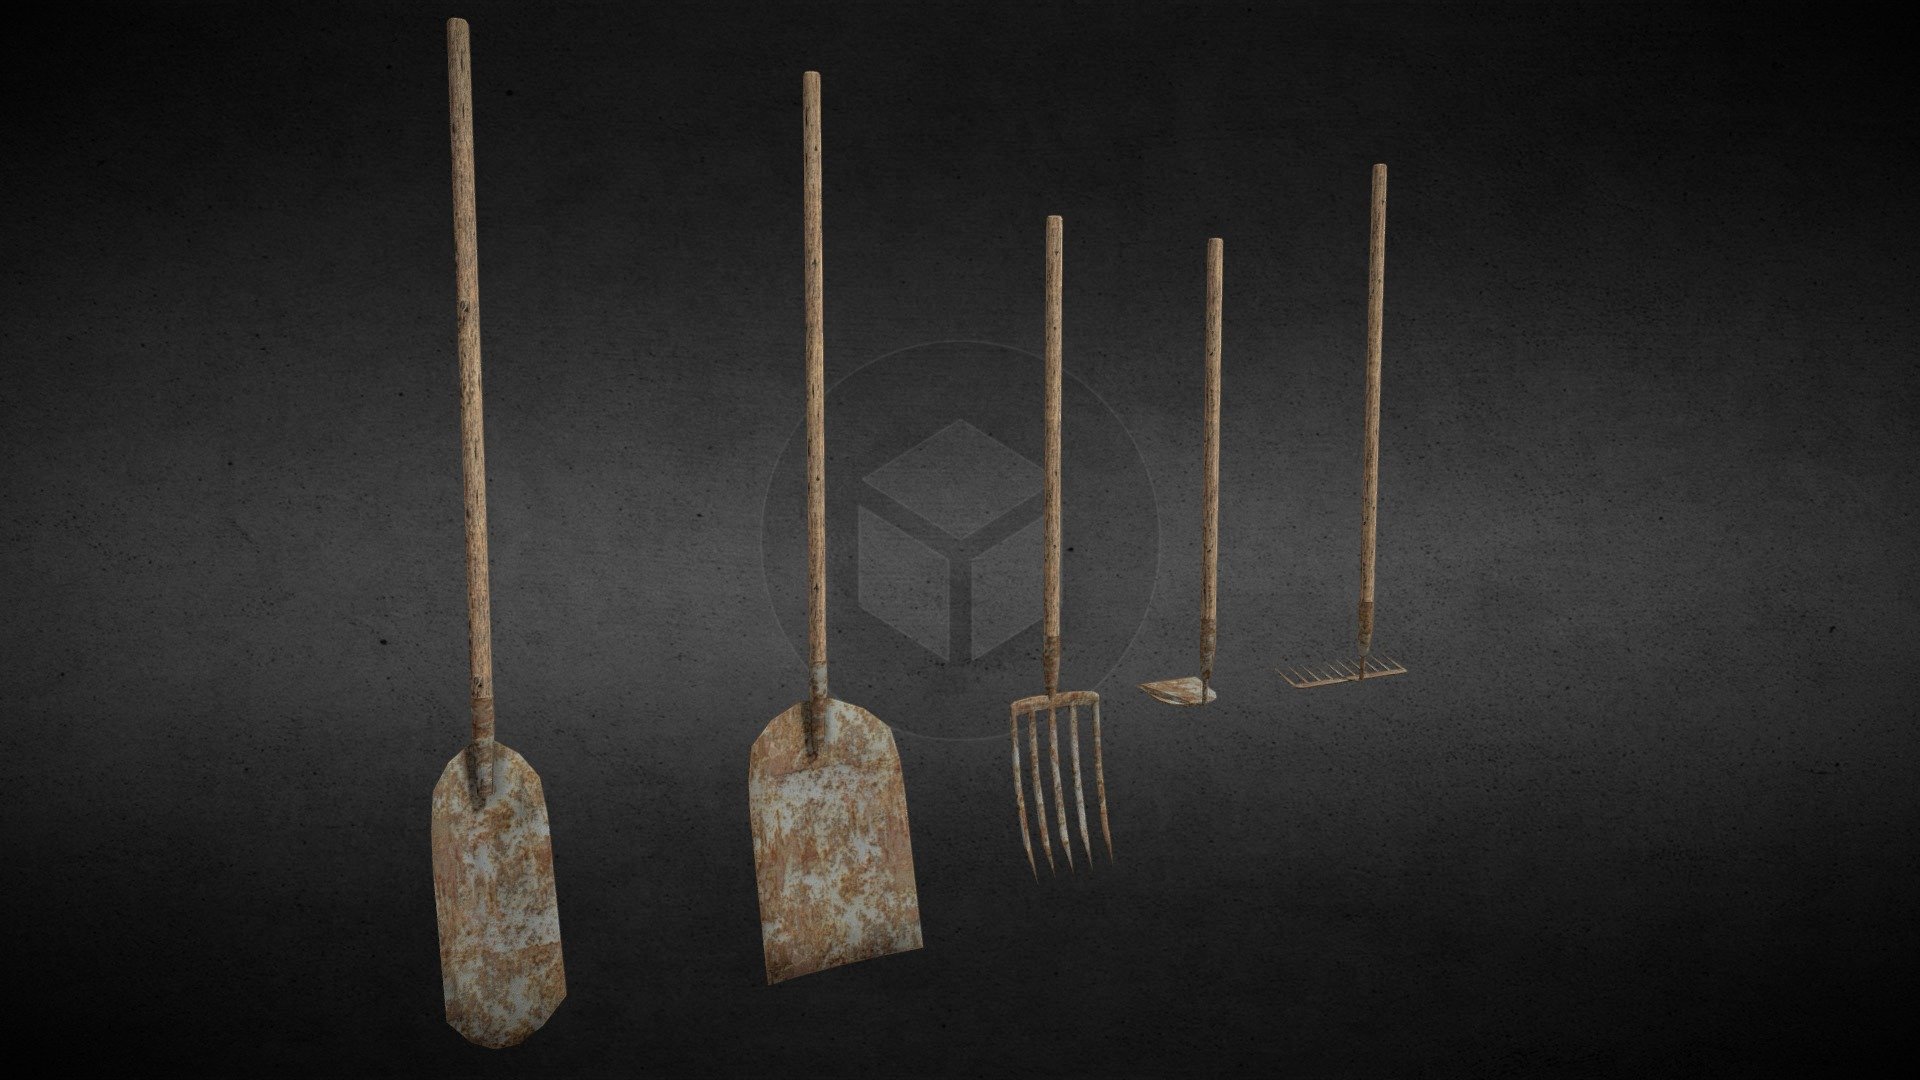 A low-poly set of Farm tools that were made for my upcoming game, Shinrin Yoku. Each item uses the same 1024x1024 texture to help with batching in your game engine.Feel free to use these models in anyway you wish, just dont’t claim ownership.

Credit is not required, but is appreciated.

Follow me on Facebook, Instagram, or SketchFab to support me and keep up with future game releases 3d model